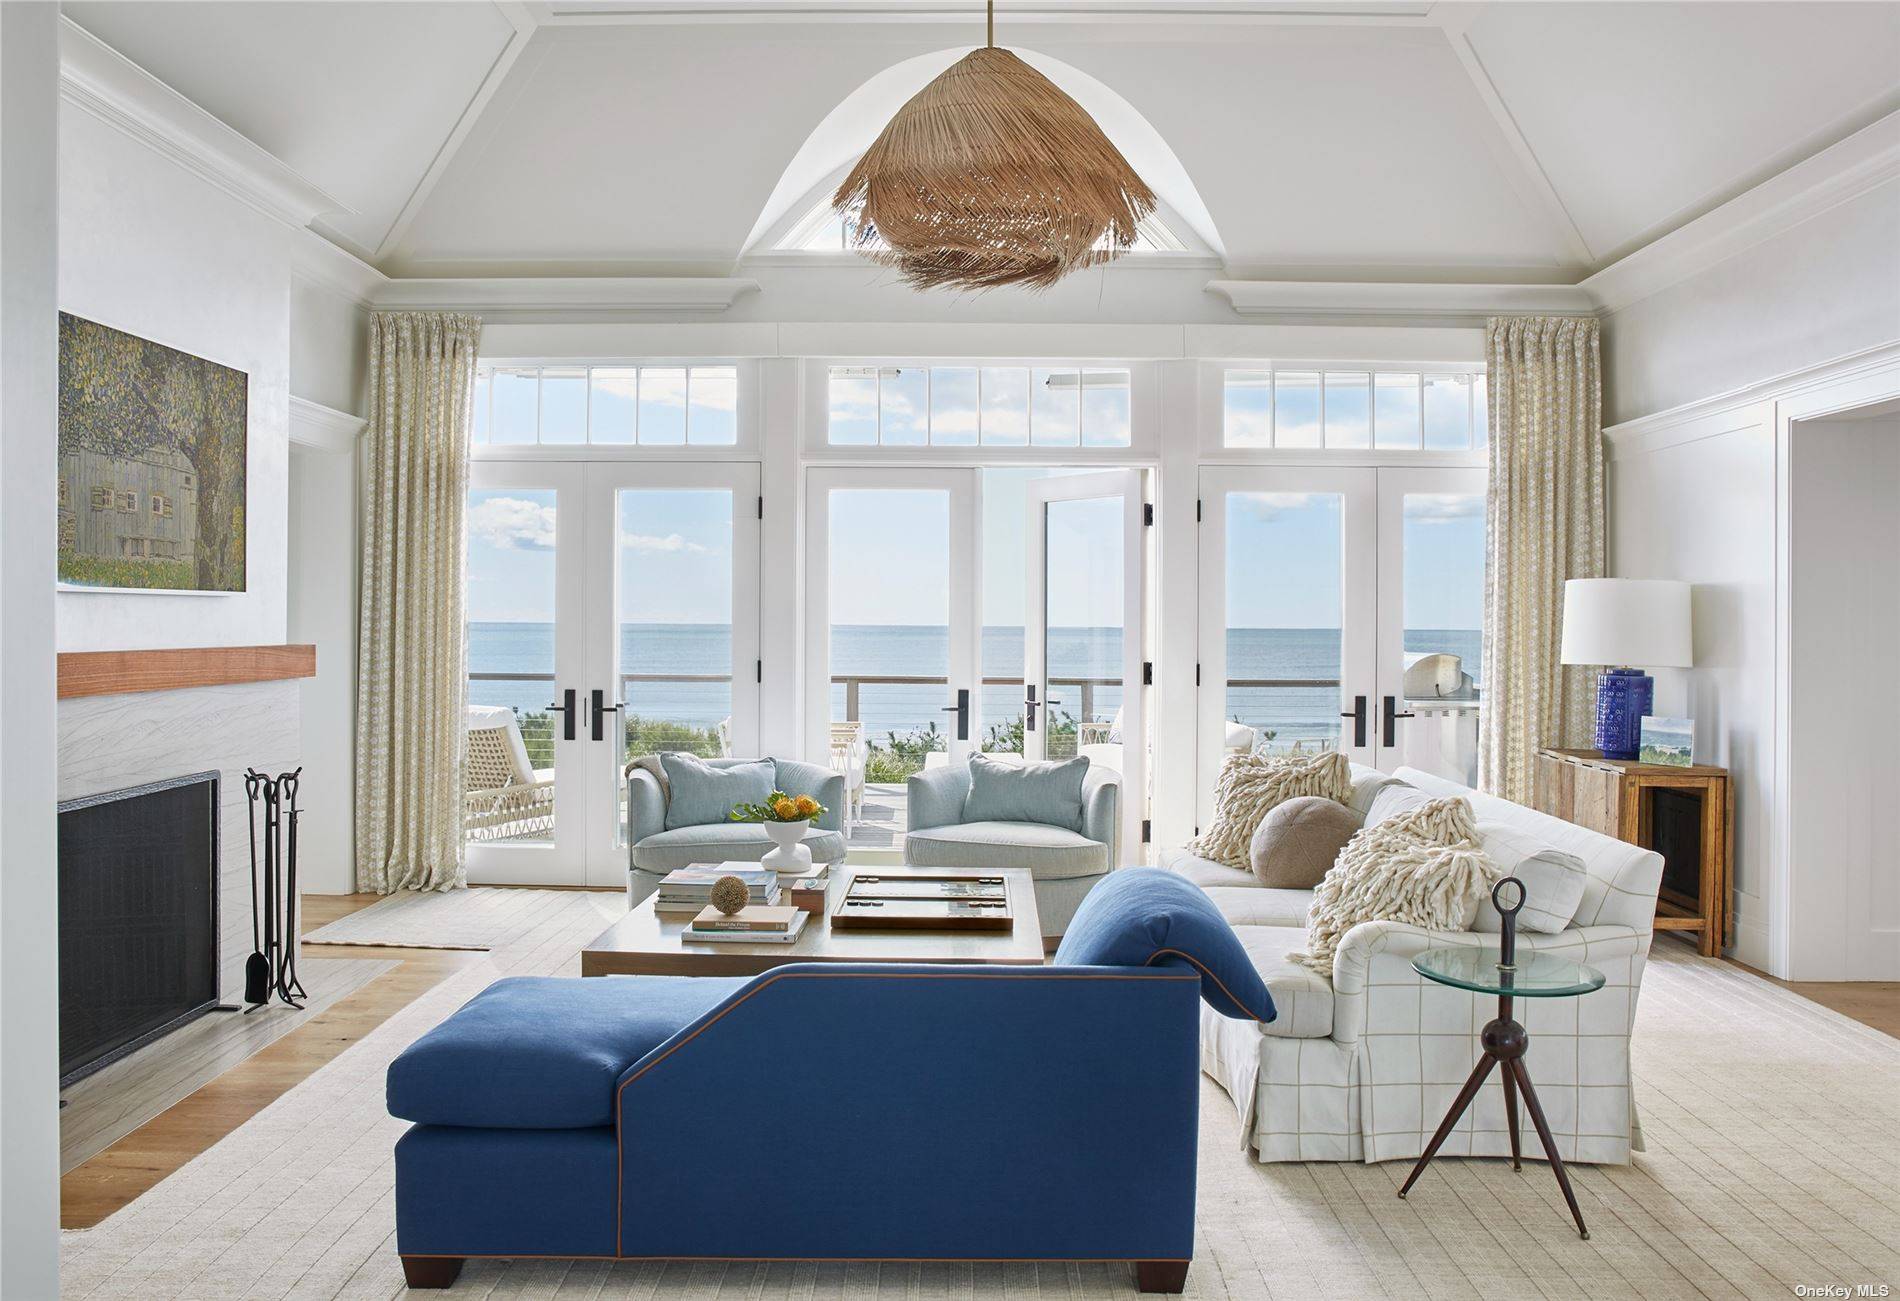 Escape to summer bliss at this exquisite new construction, oceanfront home in Quogue, offering unrivaled vistas of the ocean and bay.